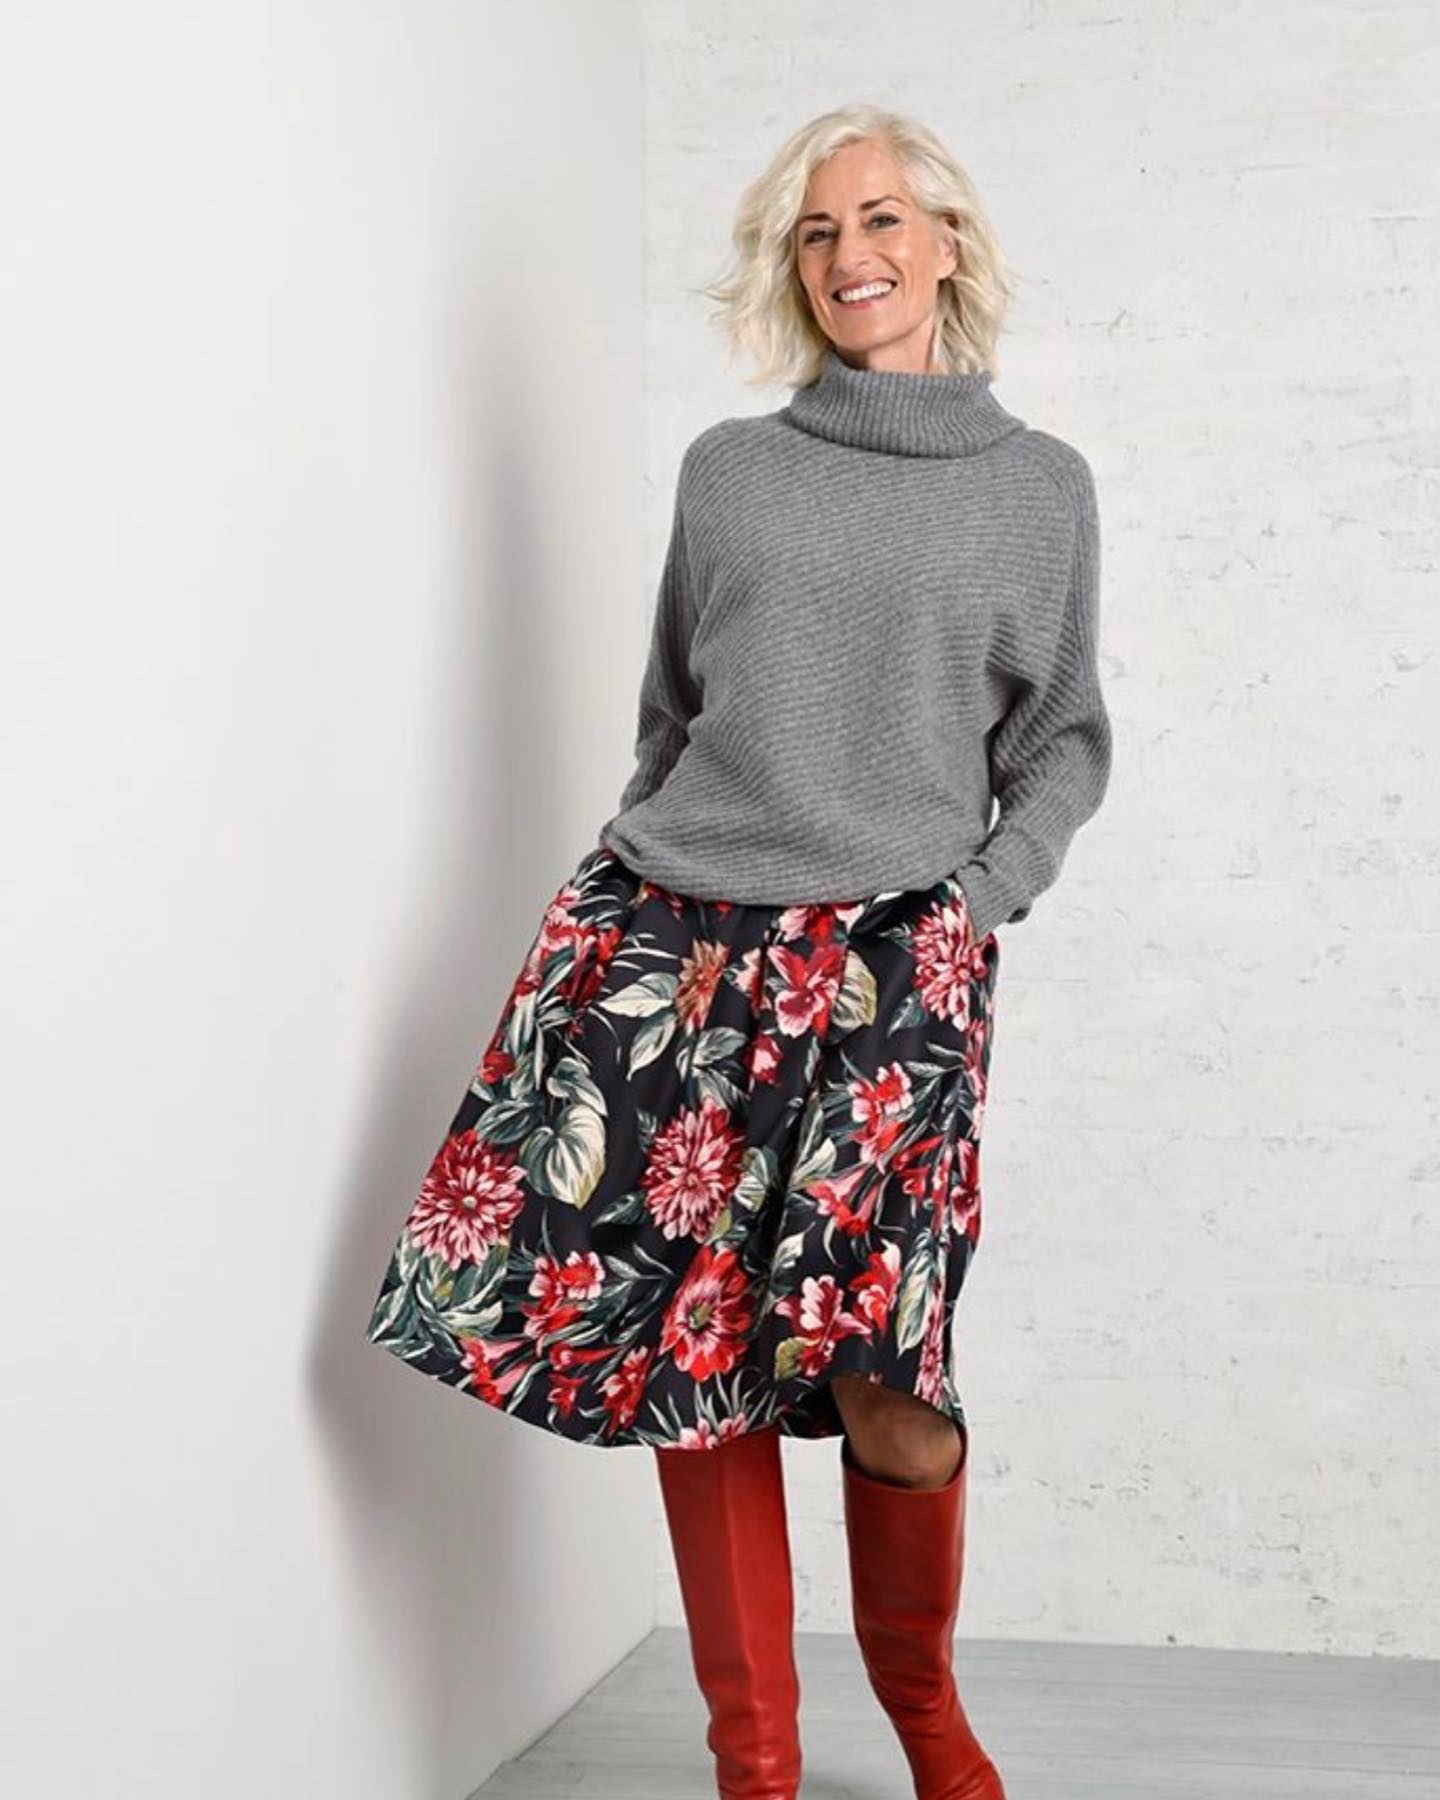 Light Skirt with Thick Gray Sweater